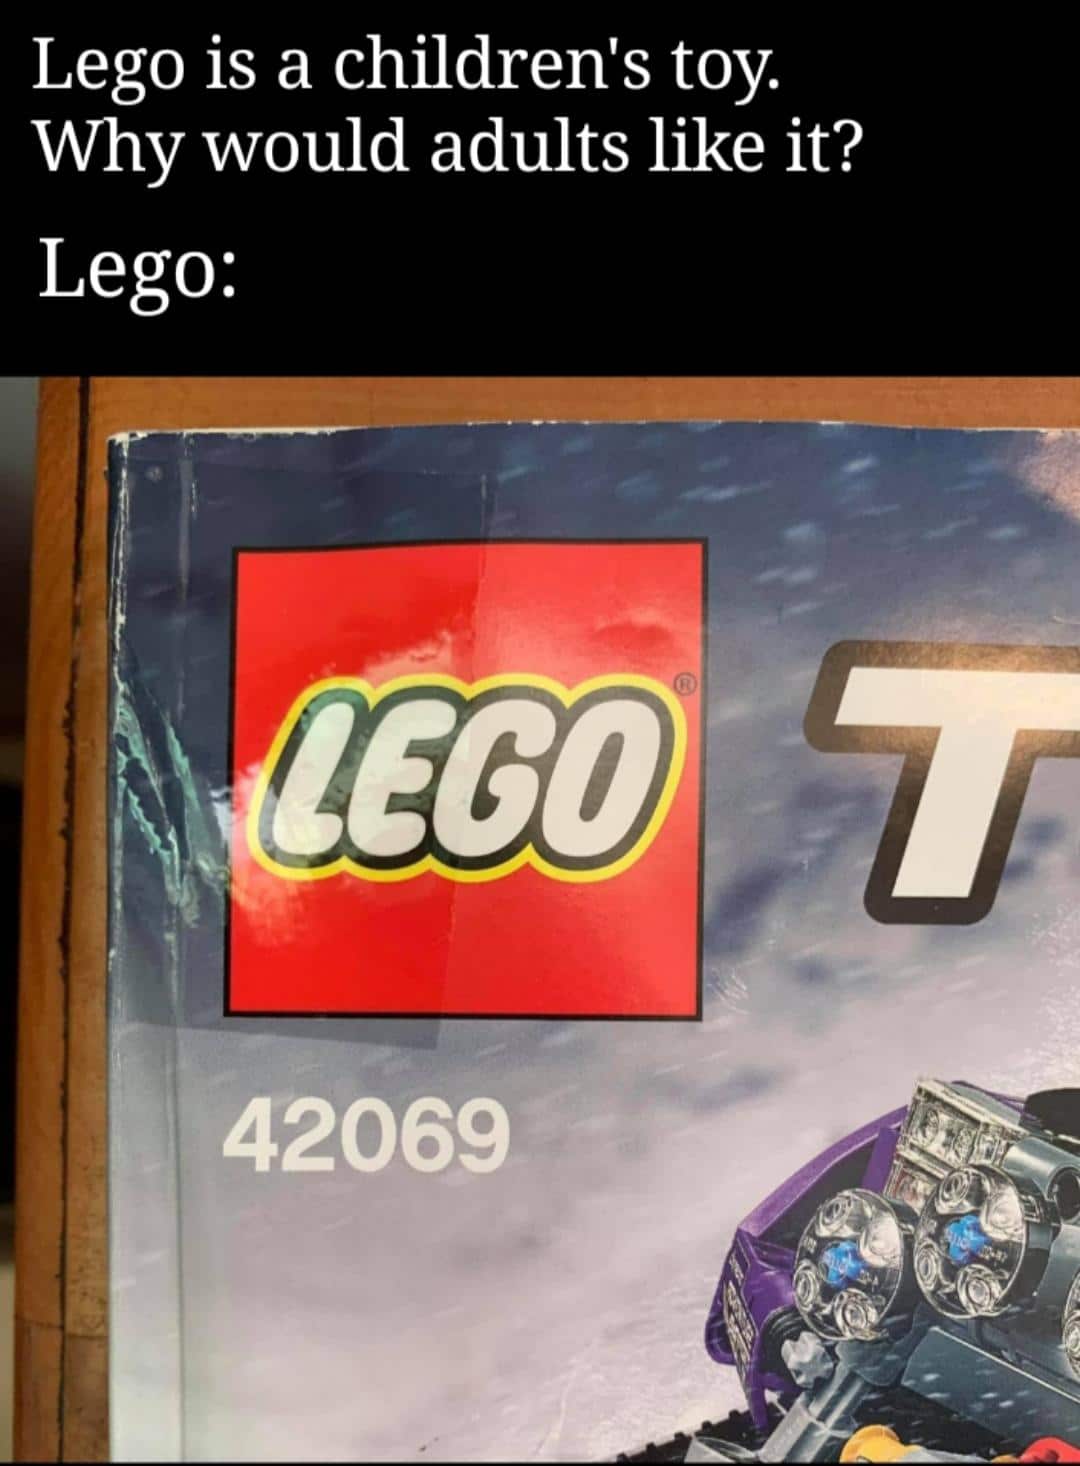 other other-memes other text: Lego is a children's toy. Why would adults like it? Lego: coo 42069 